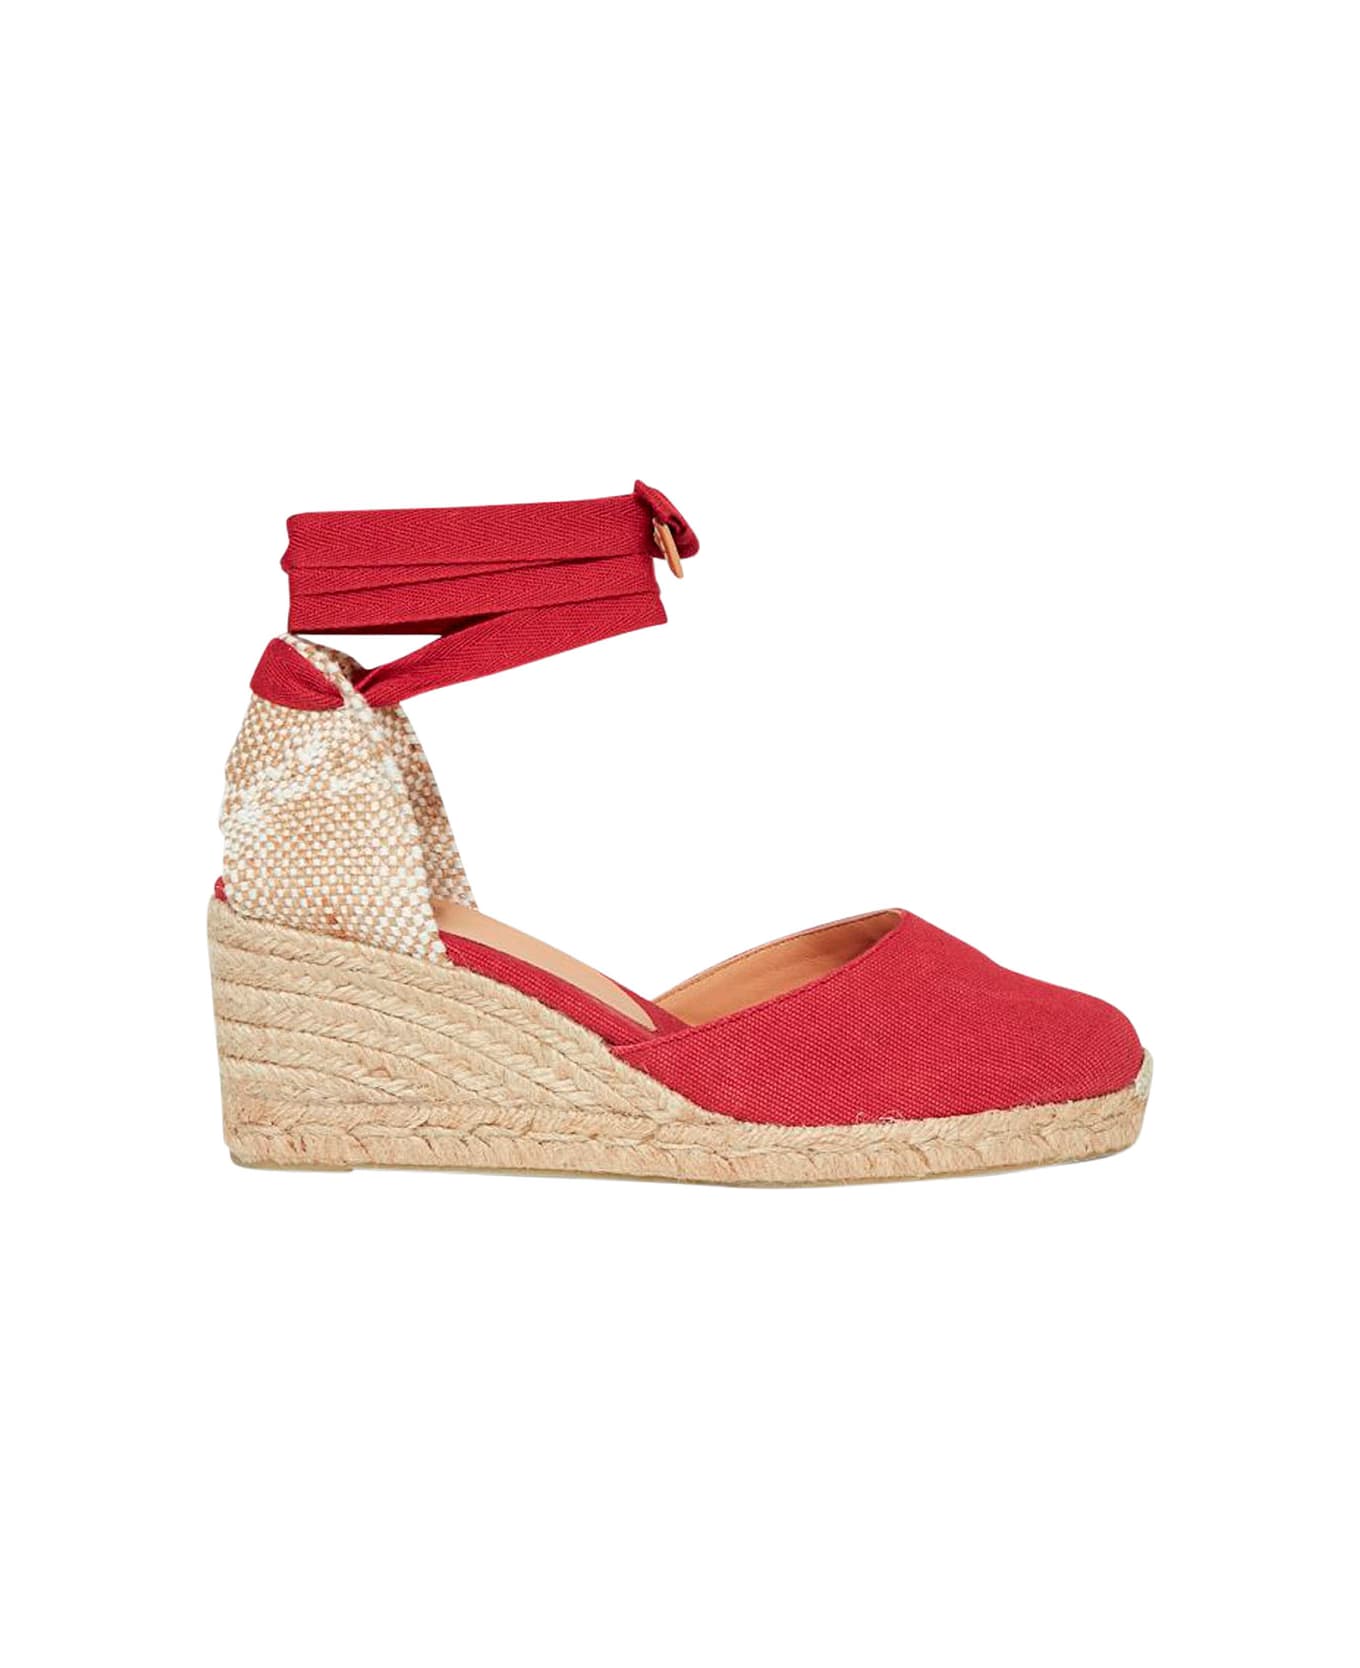 Castañer Red Espadrillas With Wedge Heel In Cotton Woman - Red ウェッジシューズ